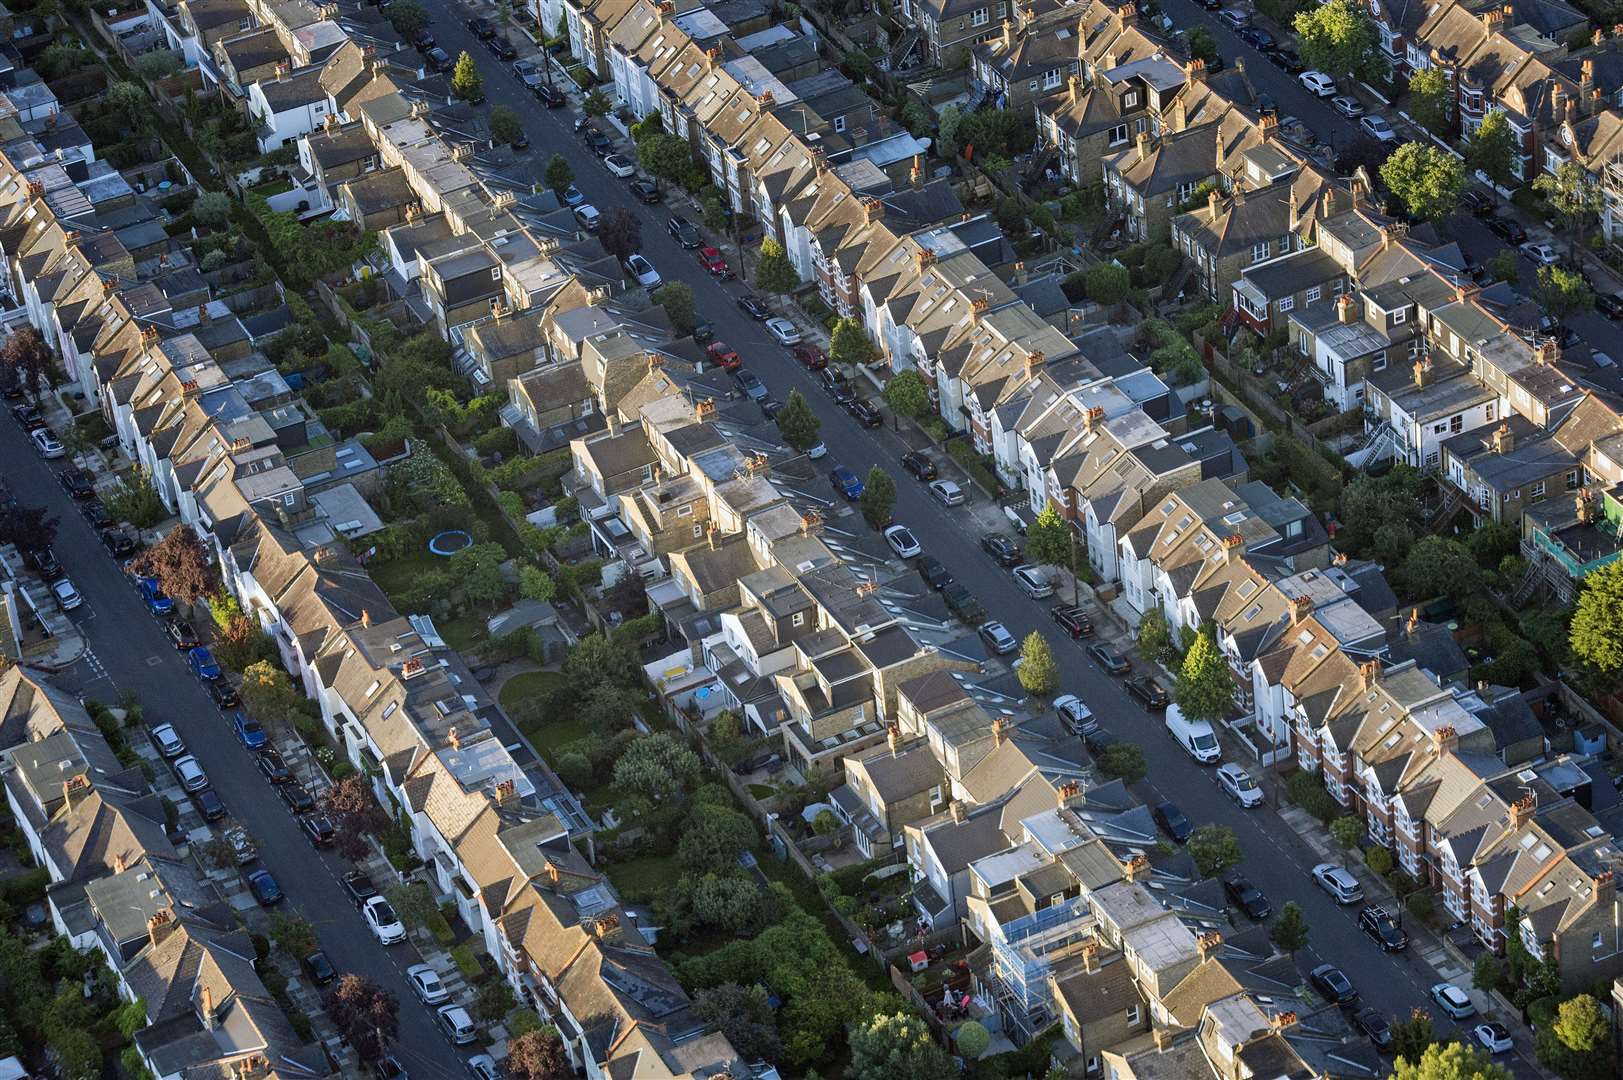 The Renters Reform Bill will seek to abolish so-called ‘no fault’ evictions by removing Section 21 of the Housing Act 1988 (Victoria Jones/PA)